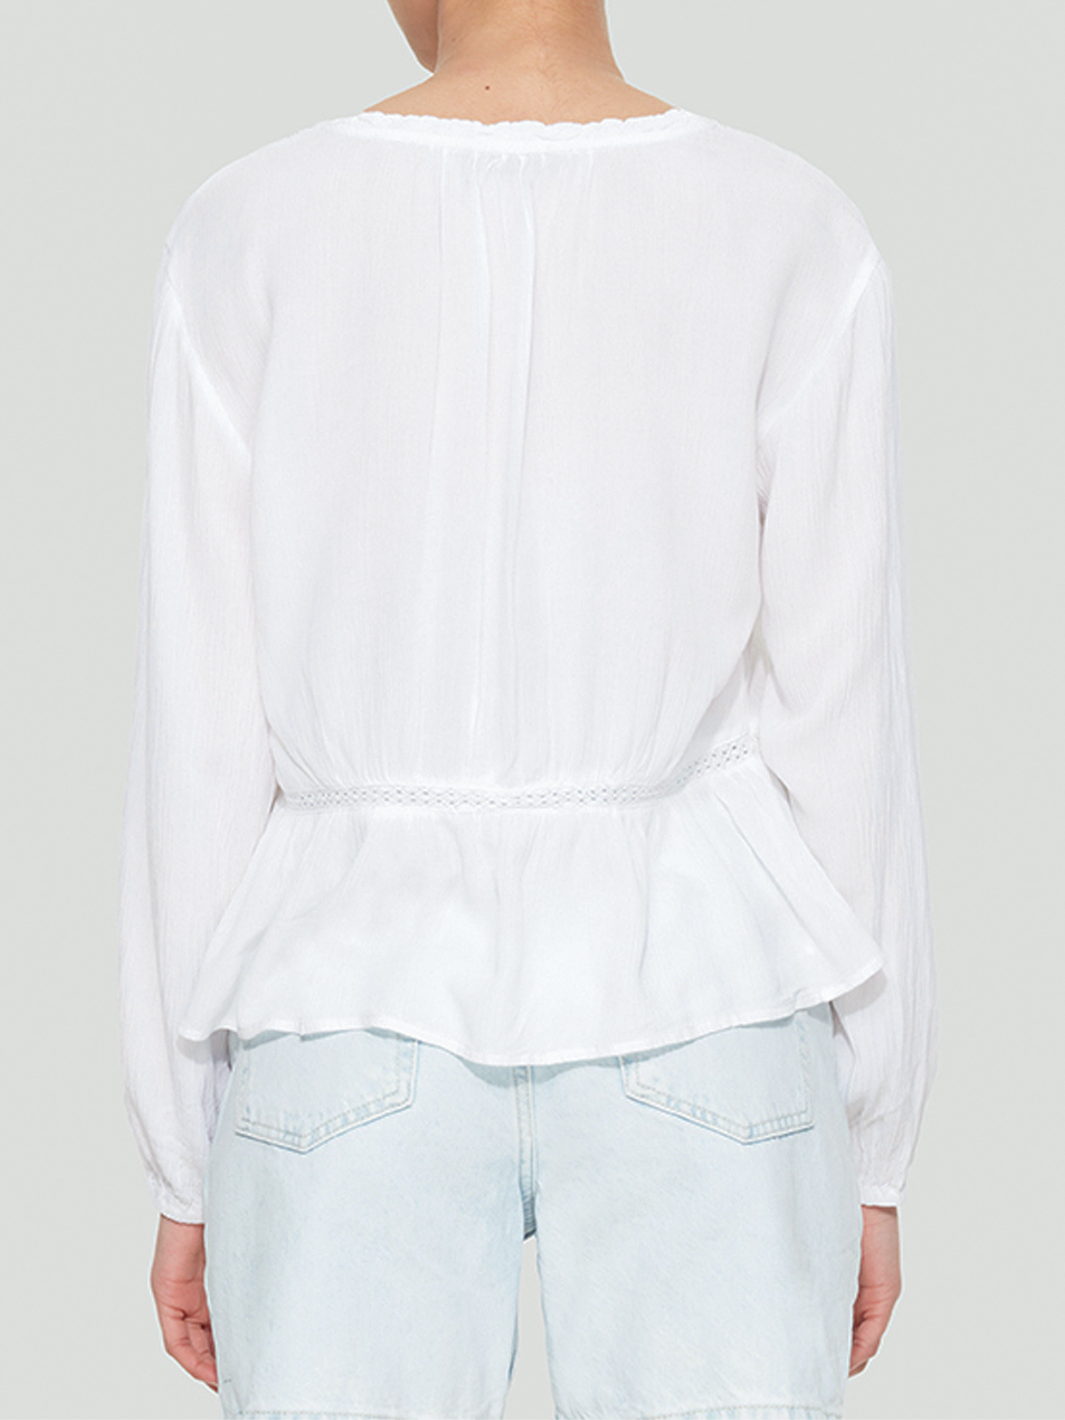 Lace Insert Tied Blouse | Off White (XS-XL)